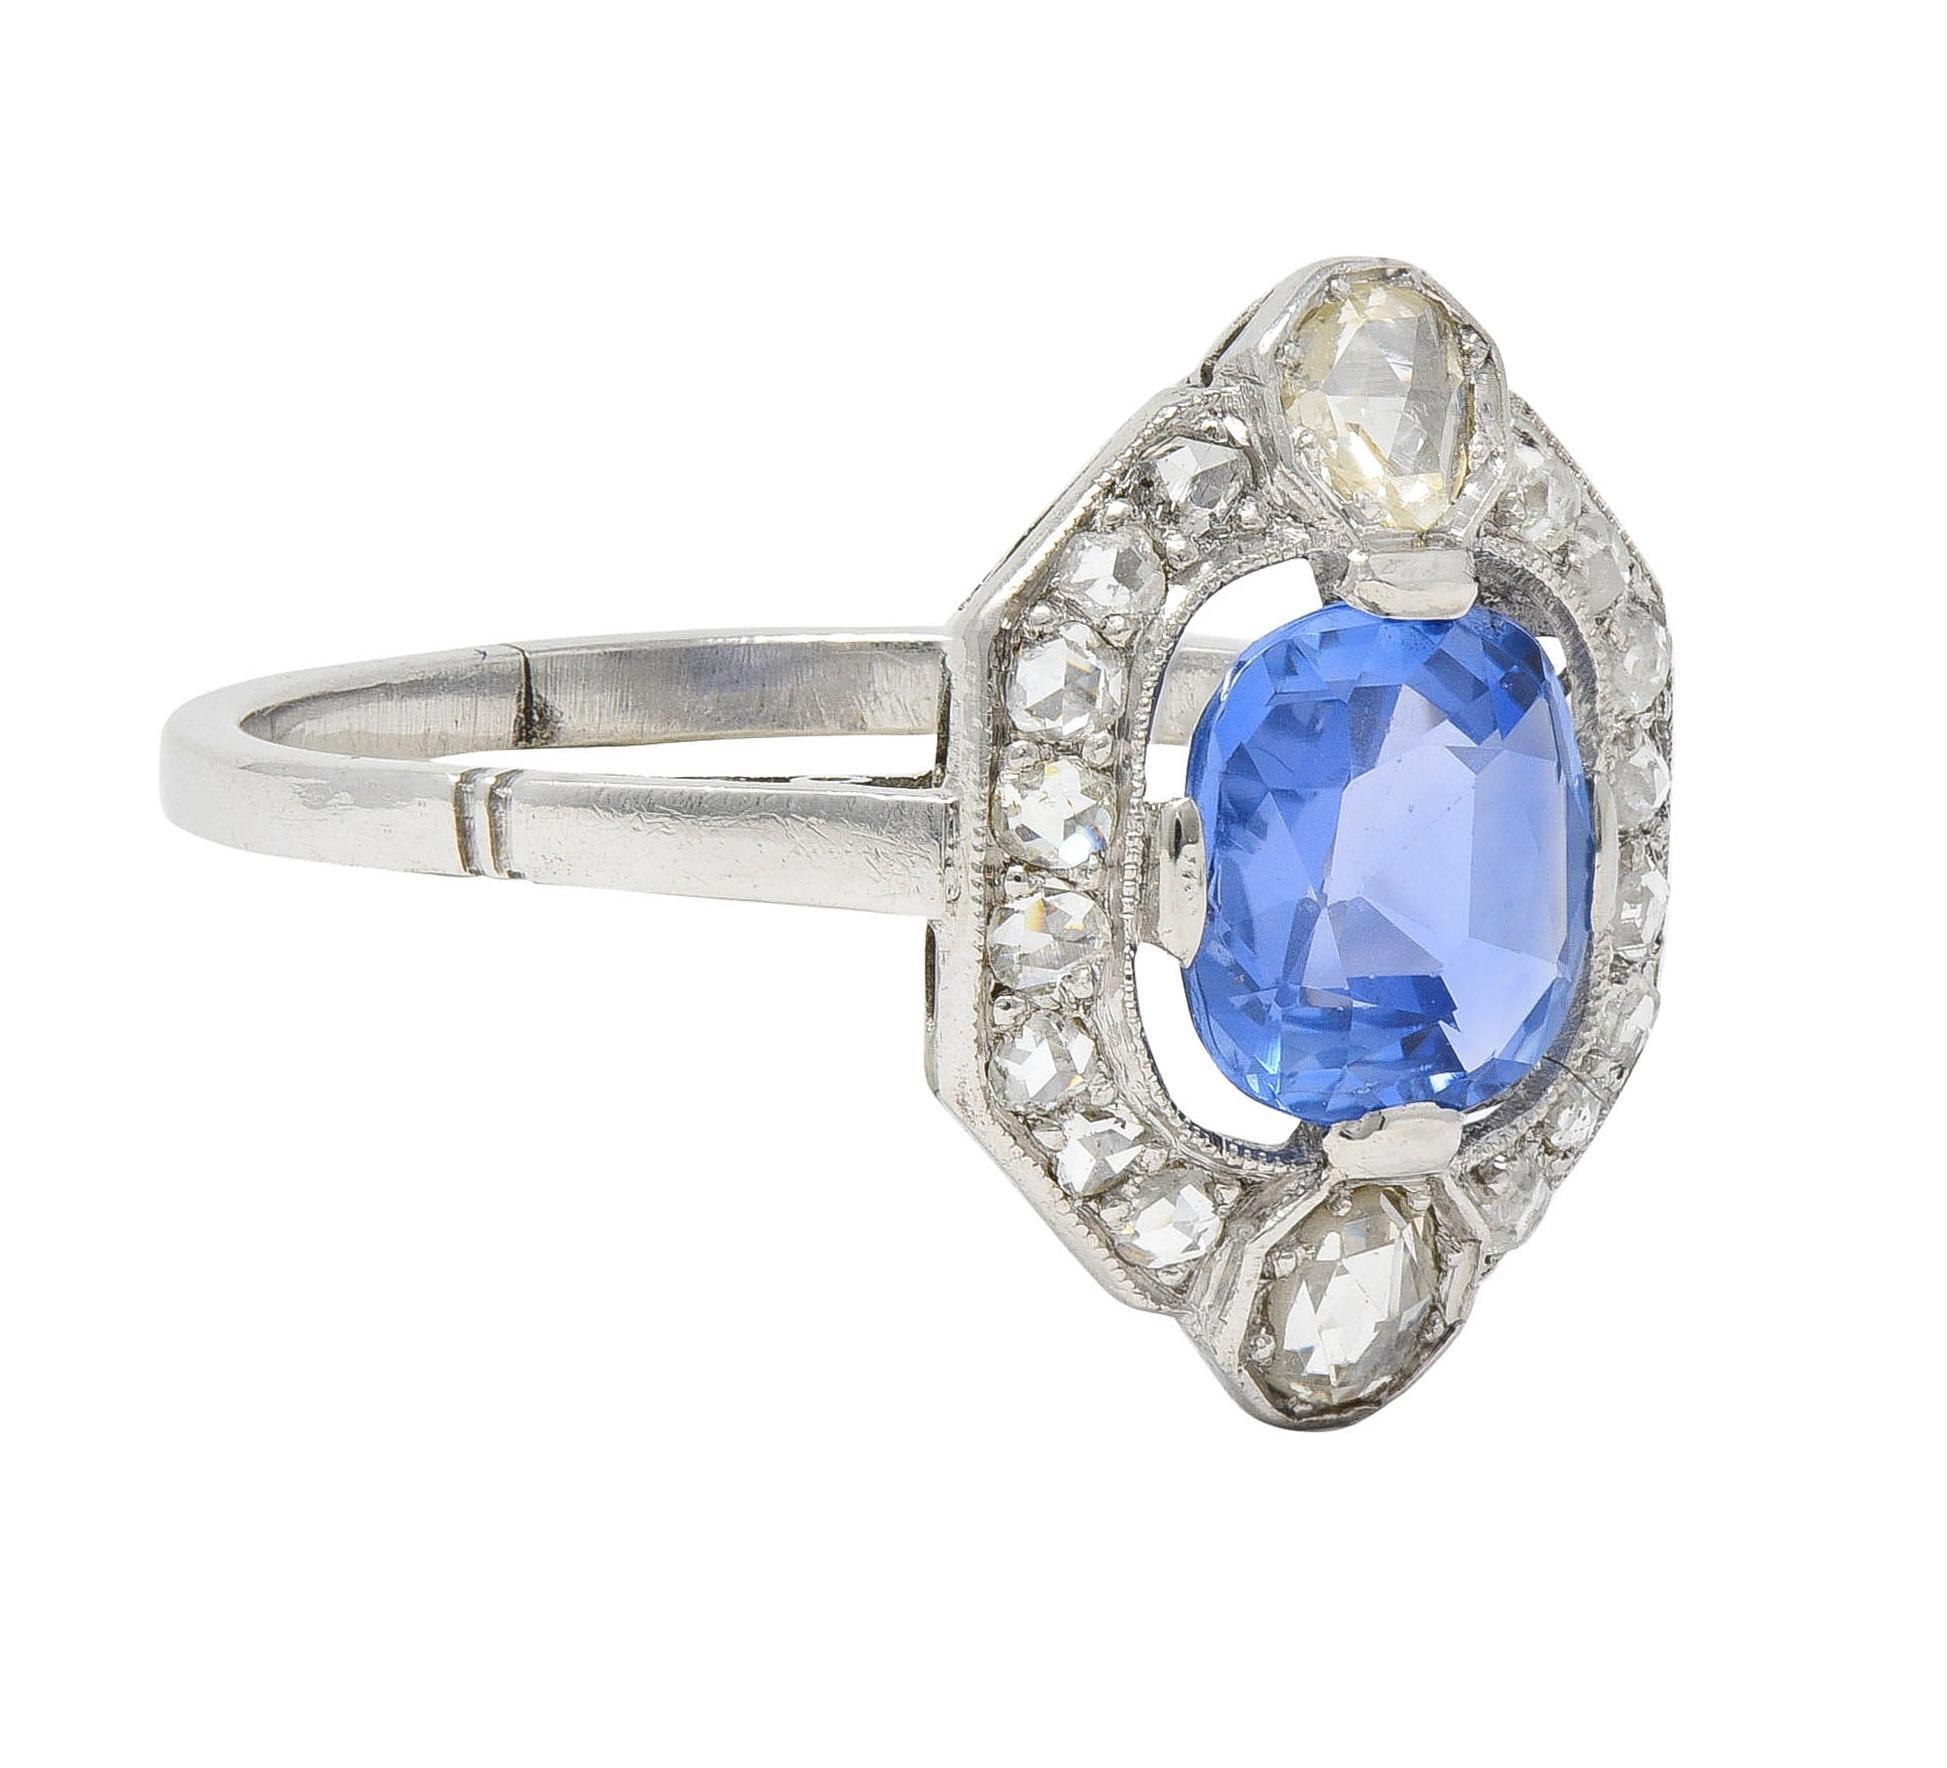 Centering a cushion cut sapphire weighing 1.72 carats total - transparent medium-light blue 
Natural Ceylon in origin and displaying no indications of heat treatment
Set with wide prongs with a pierced floating halo surround
Bead set with rose cut